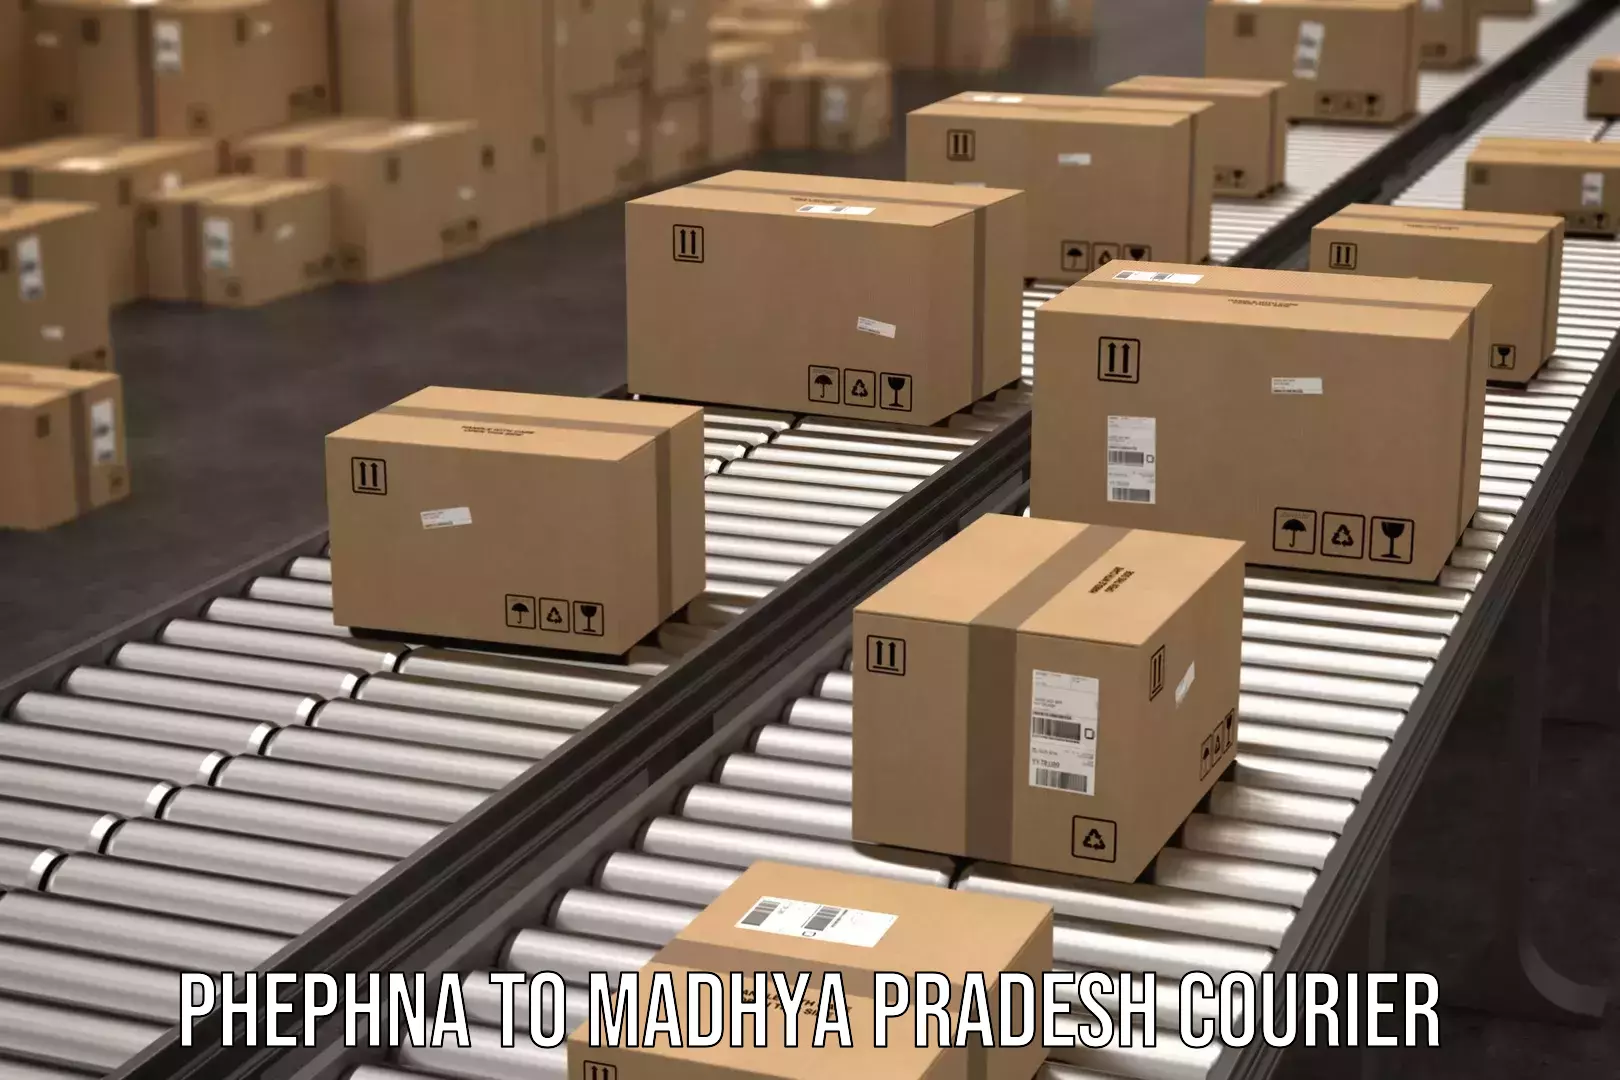 On-demand delivery in Phephna to Shujalpur